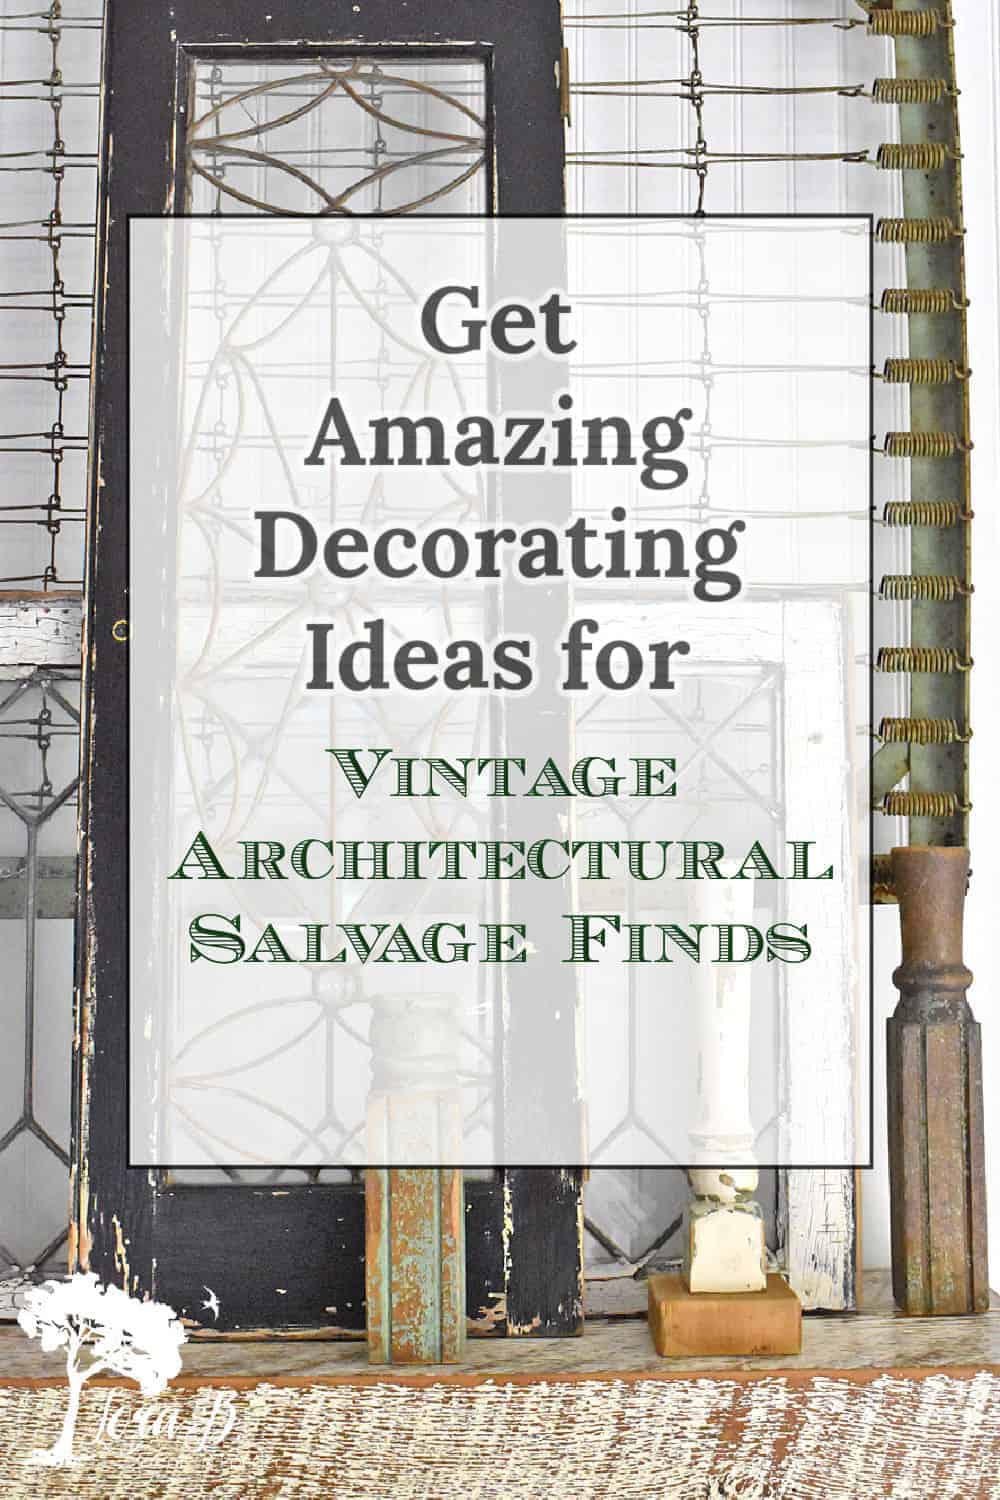 Best Ideas for Using Vintage Architectural Salvage in Your Decor